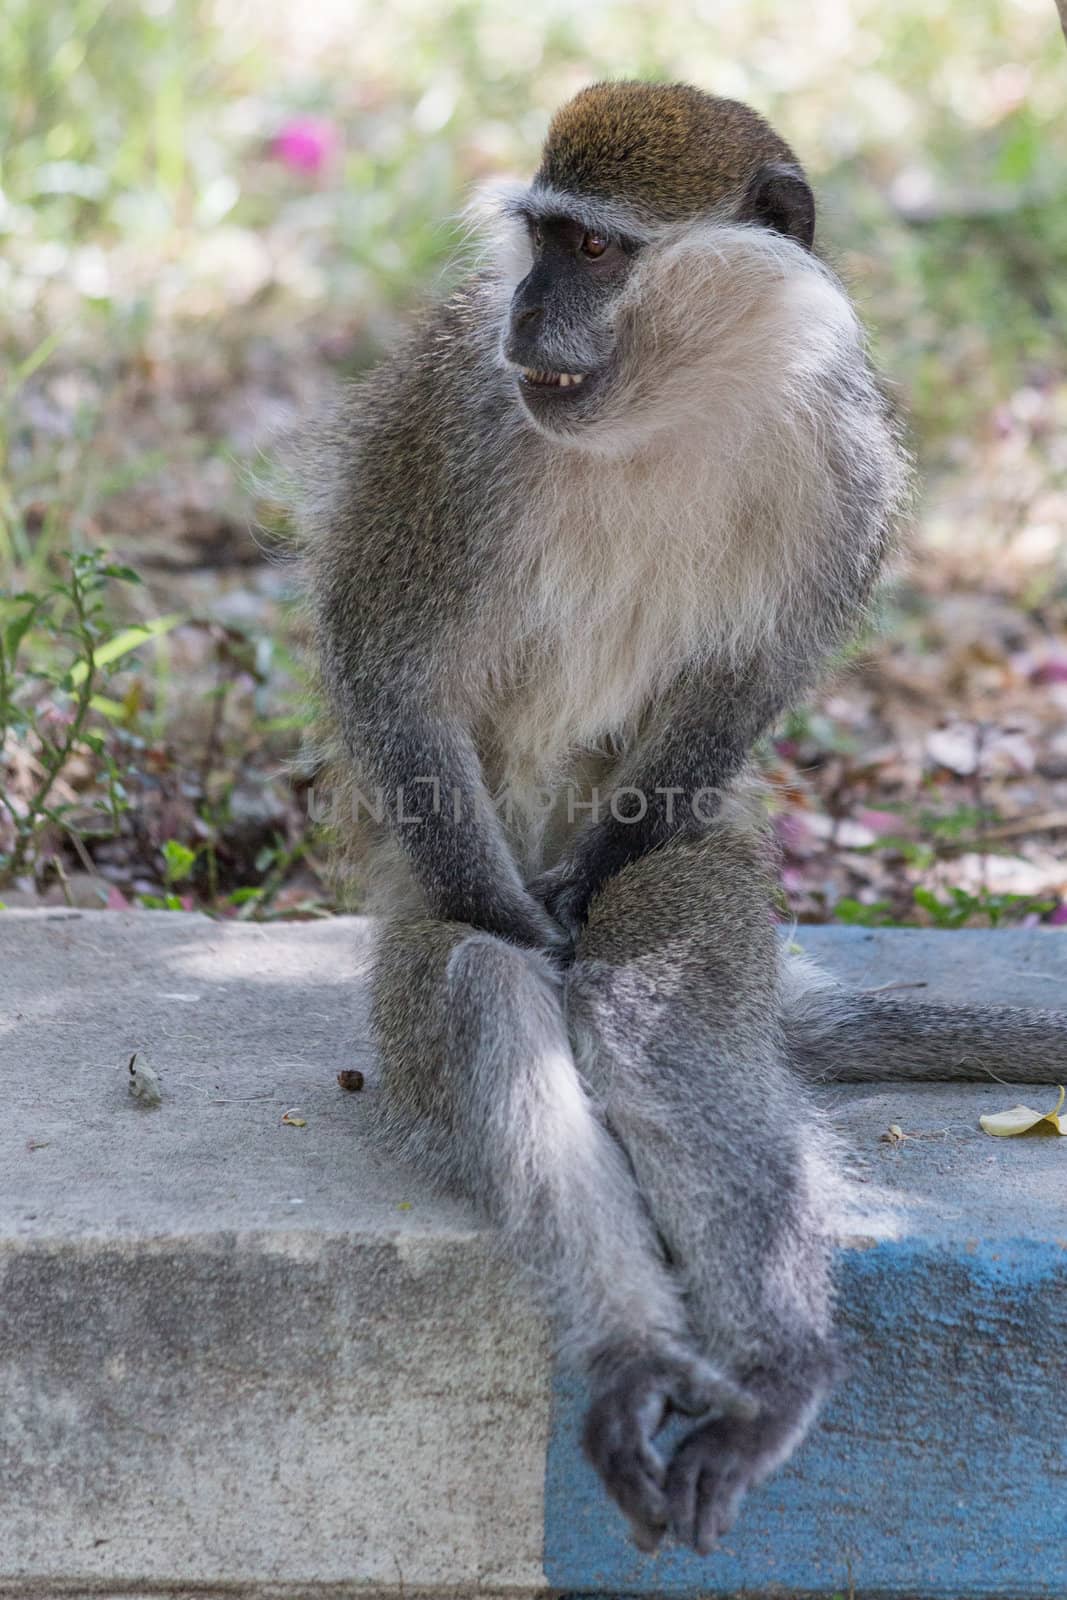 A monkey sitting on a pavement with its pritave parts covered